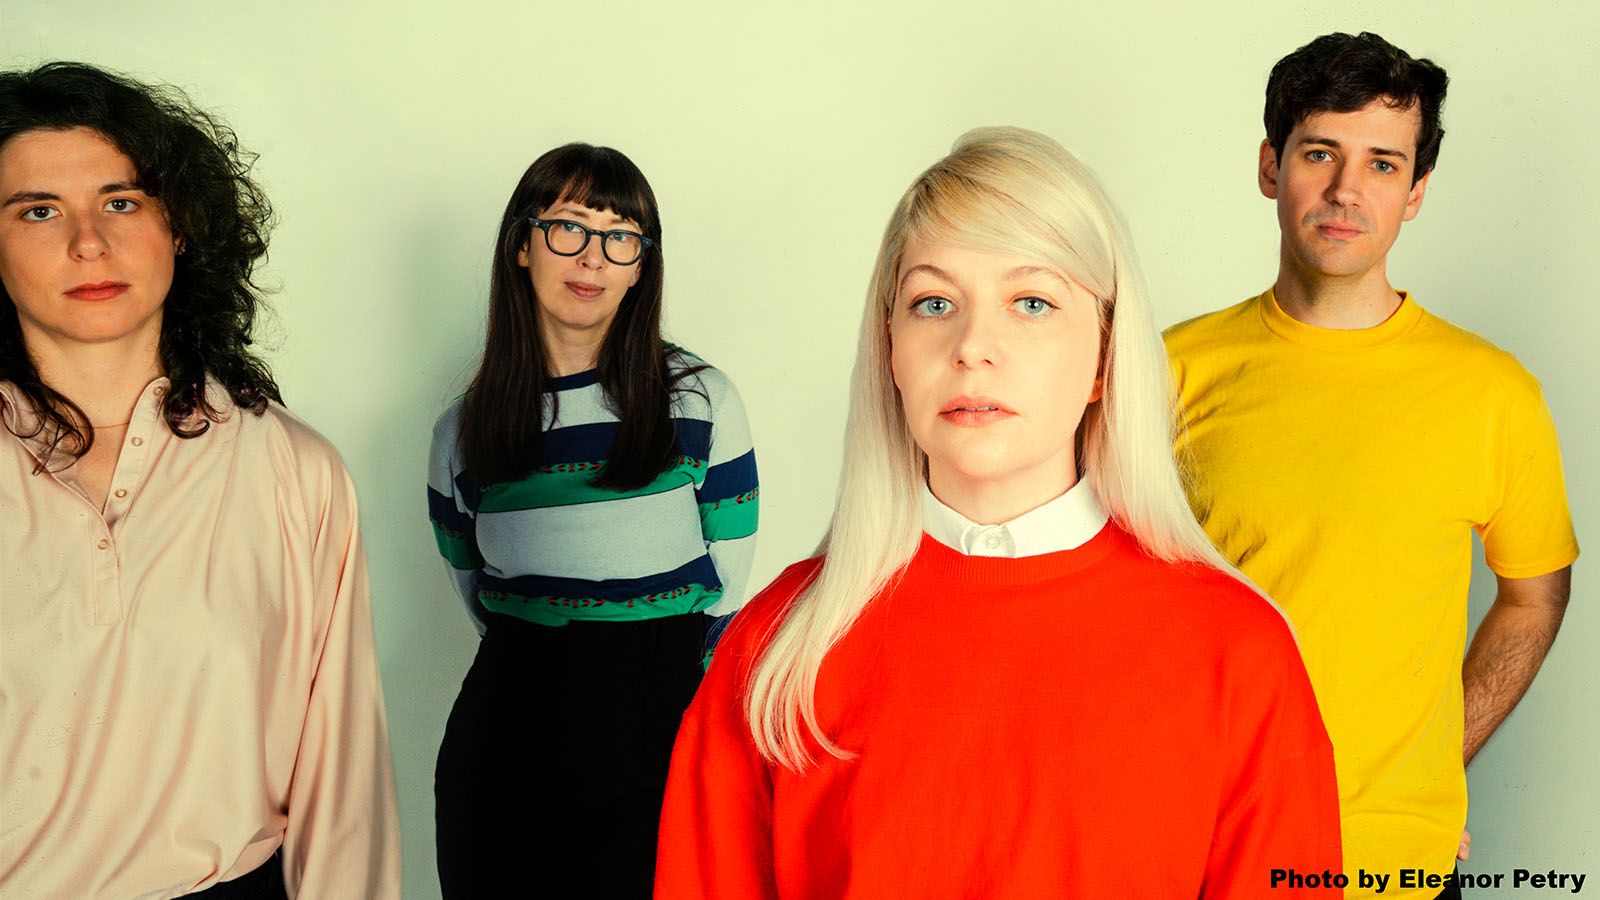 The indie rock outfit Alvvays will headline this year’s Middle Waves Music Festival at Parkview Field on Saturday, June 15..